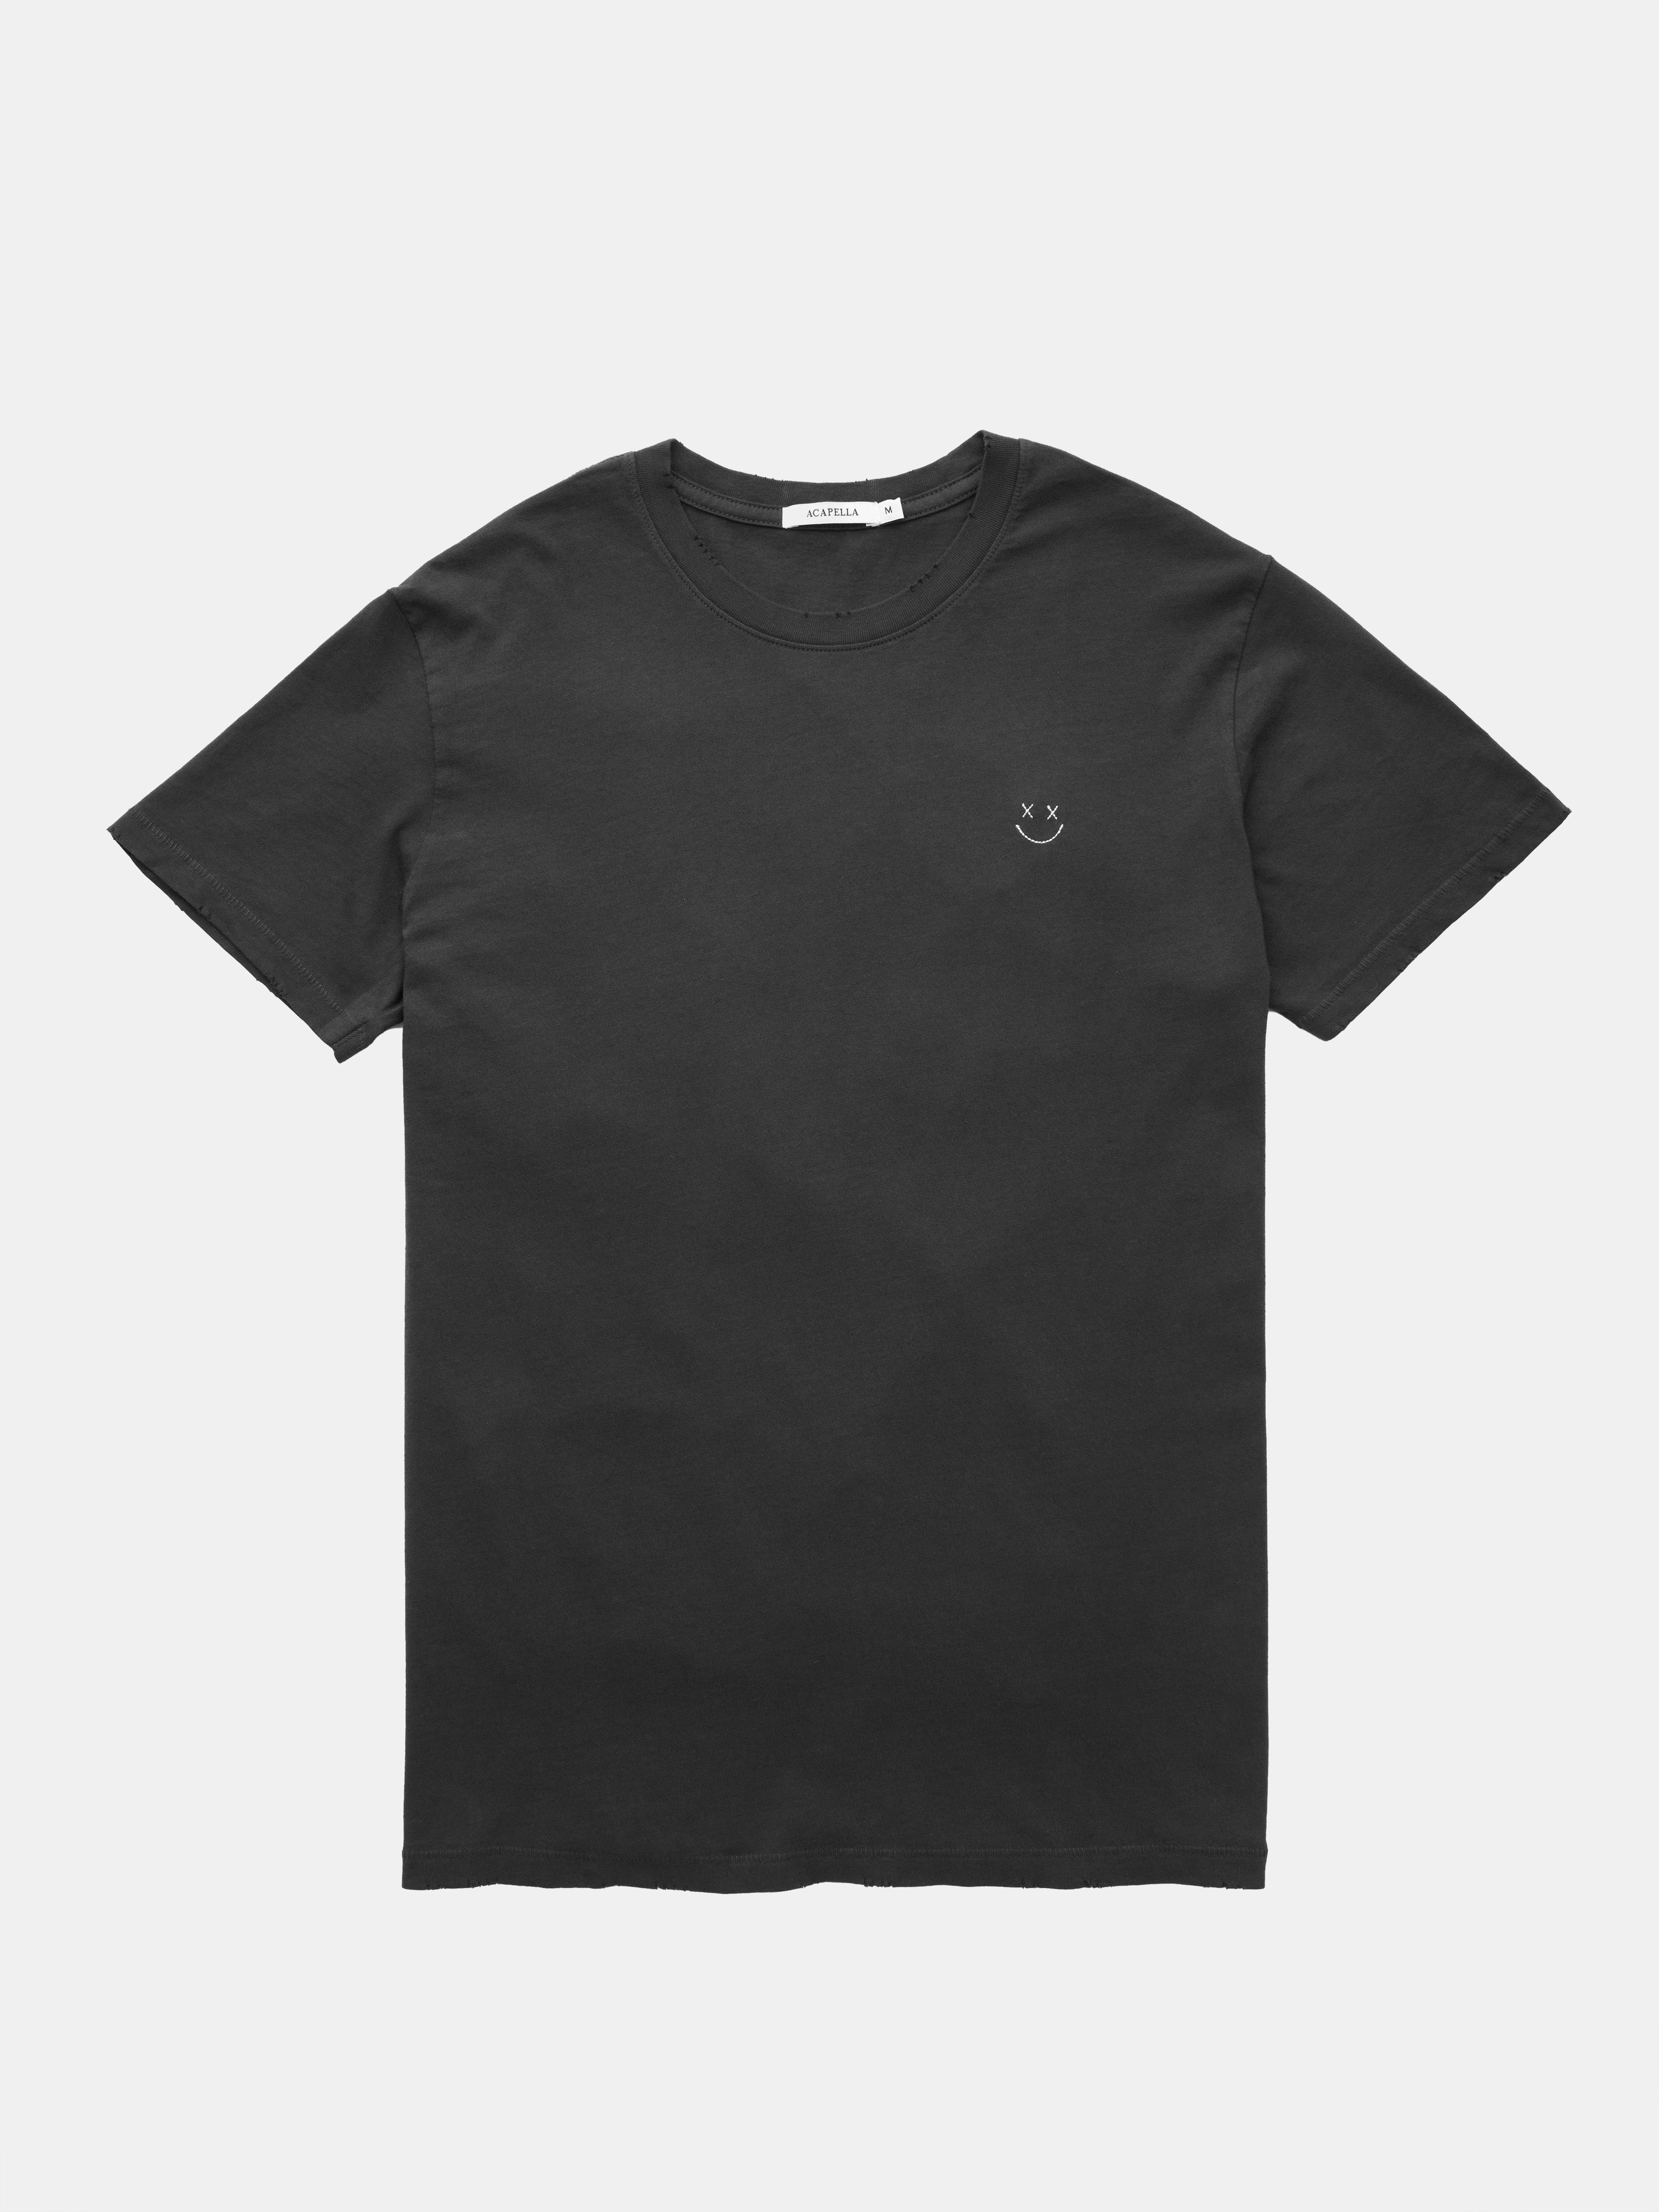 Distressed Smiley - Tee